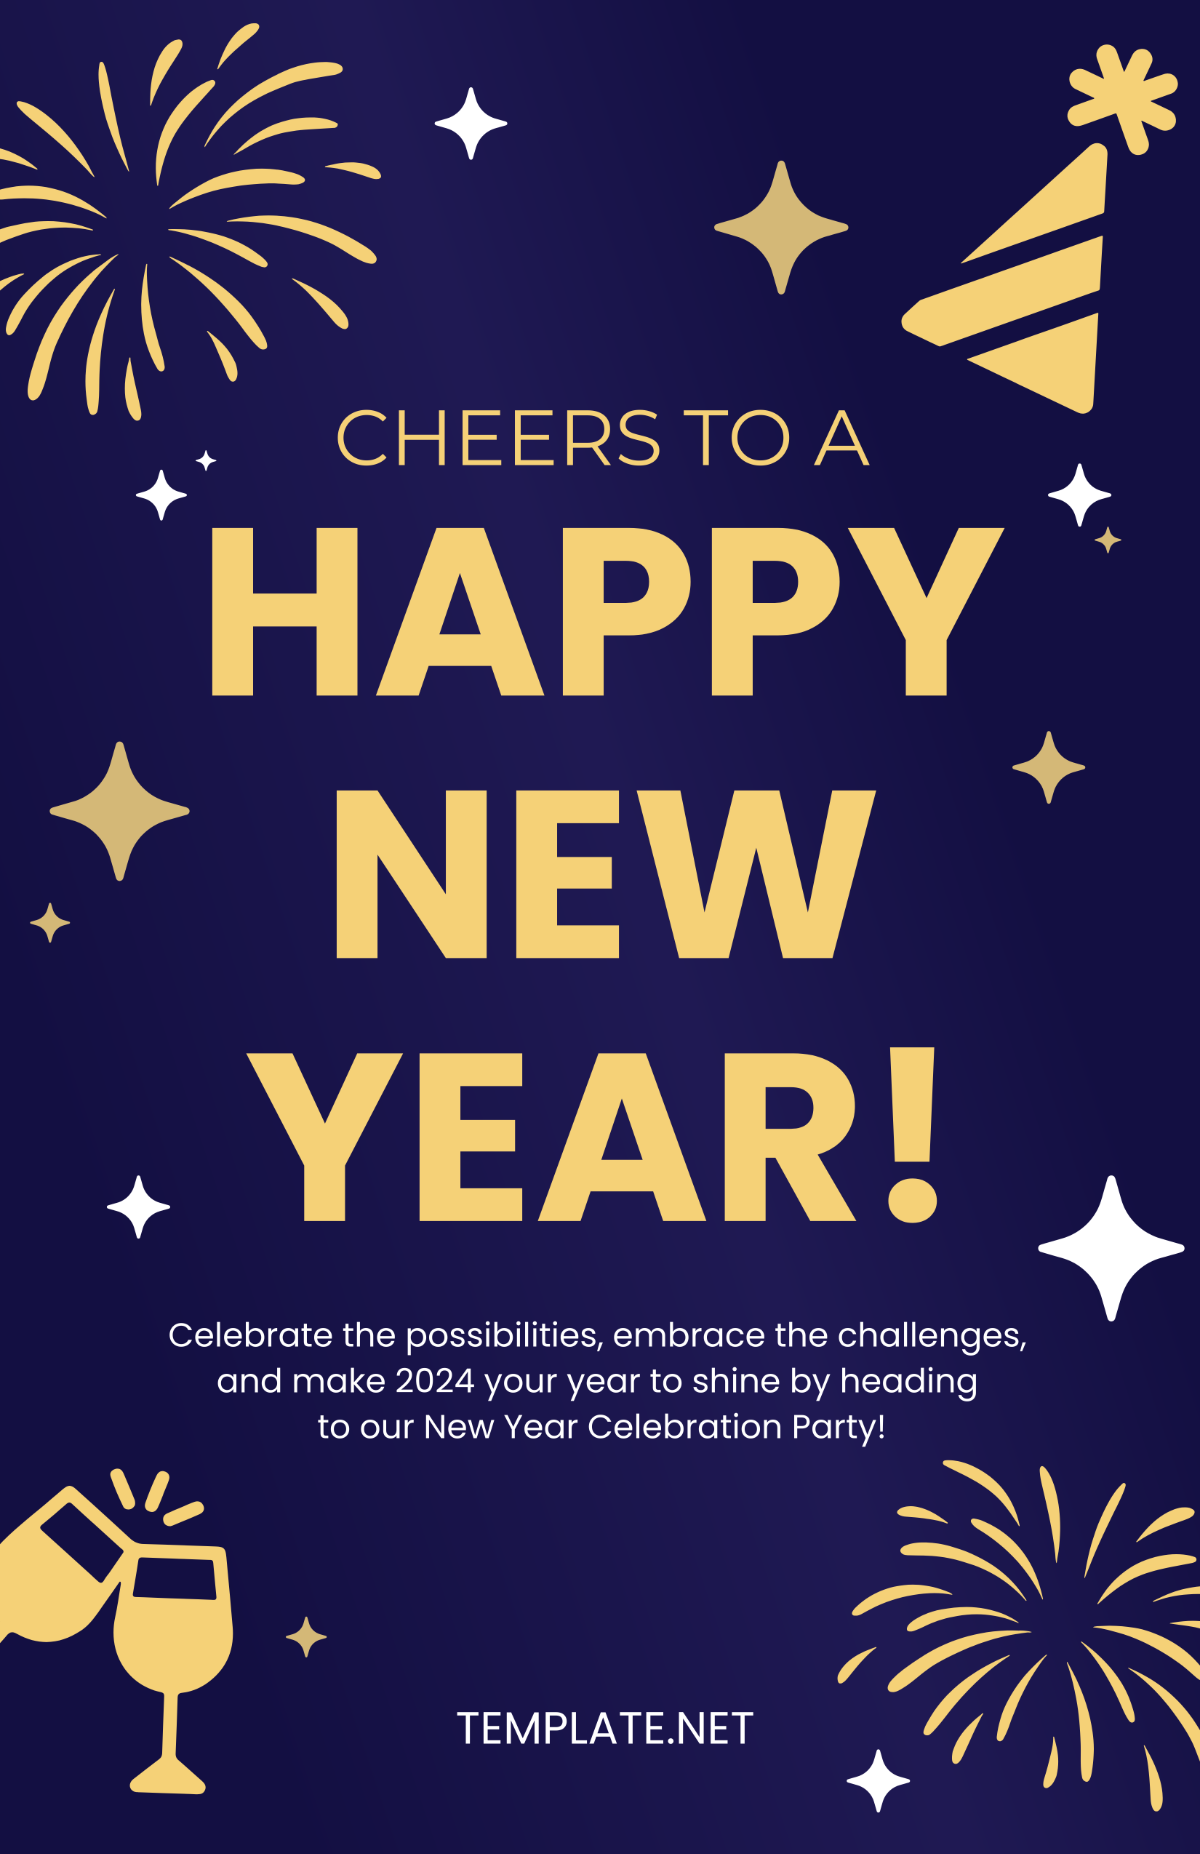 Free New Year Celebration Party Poster Template